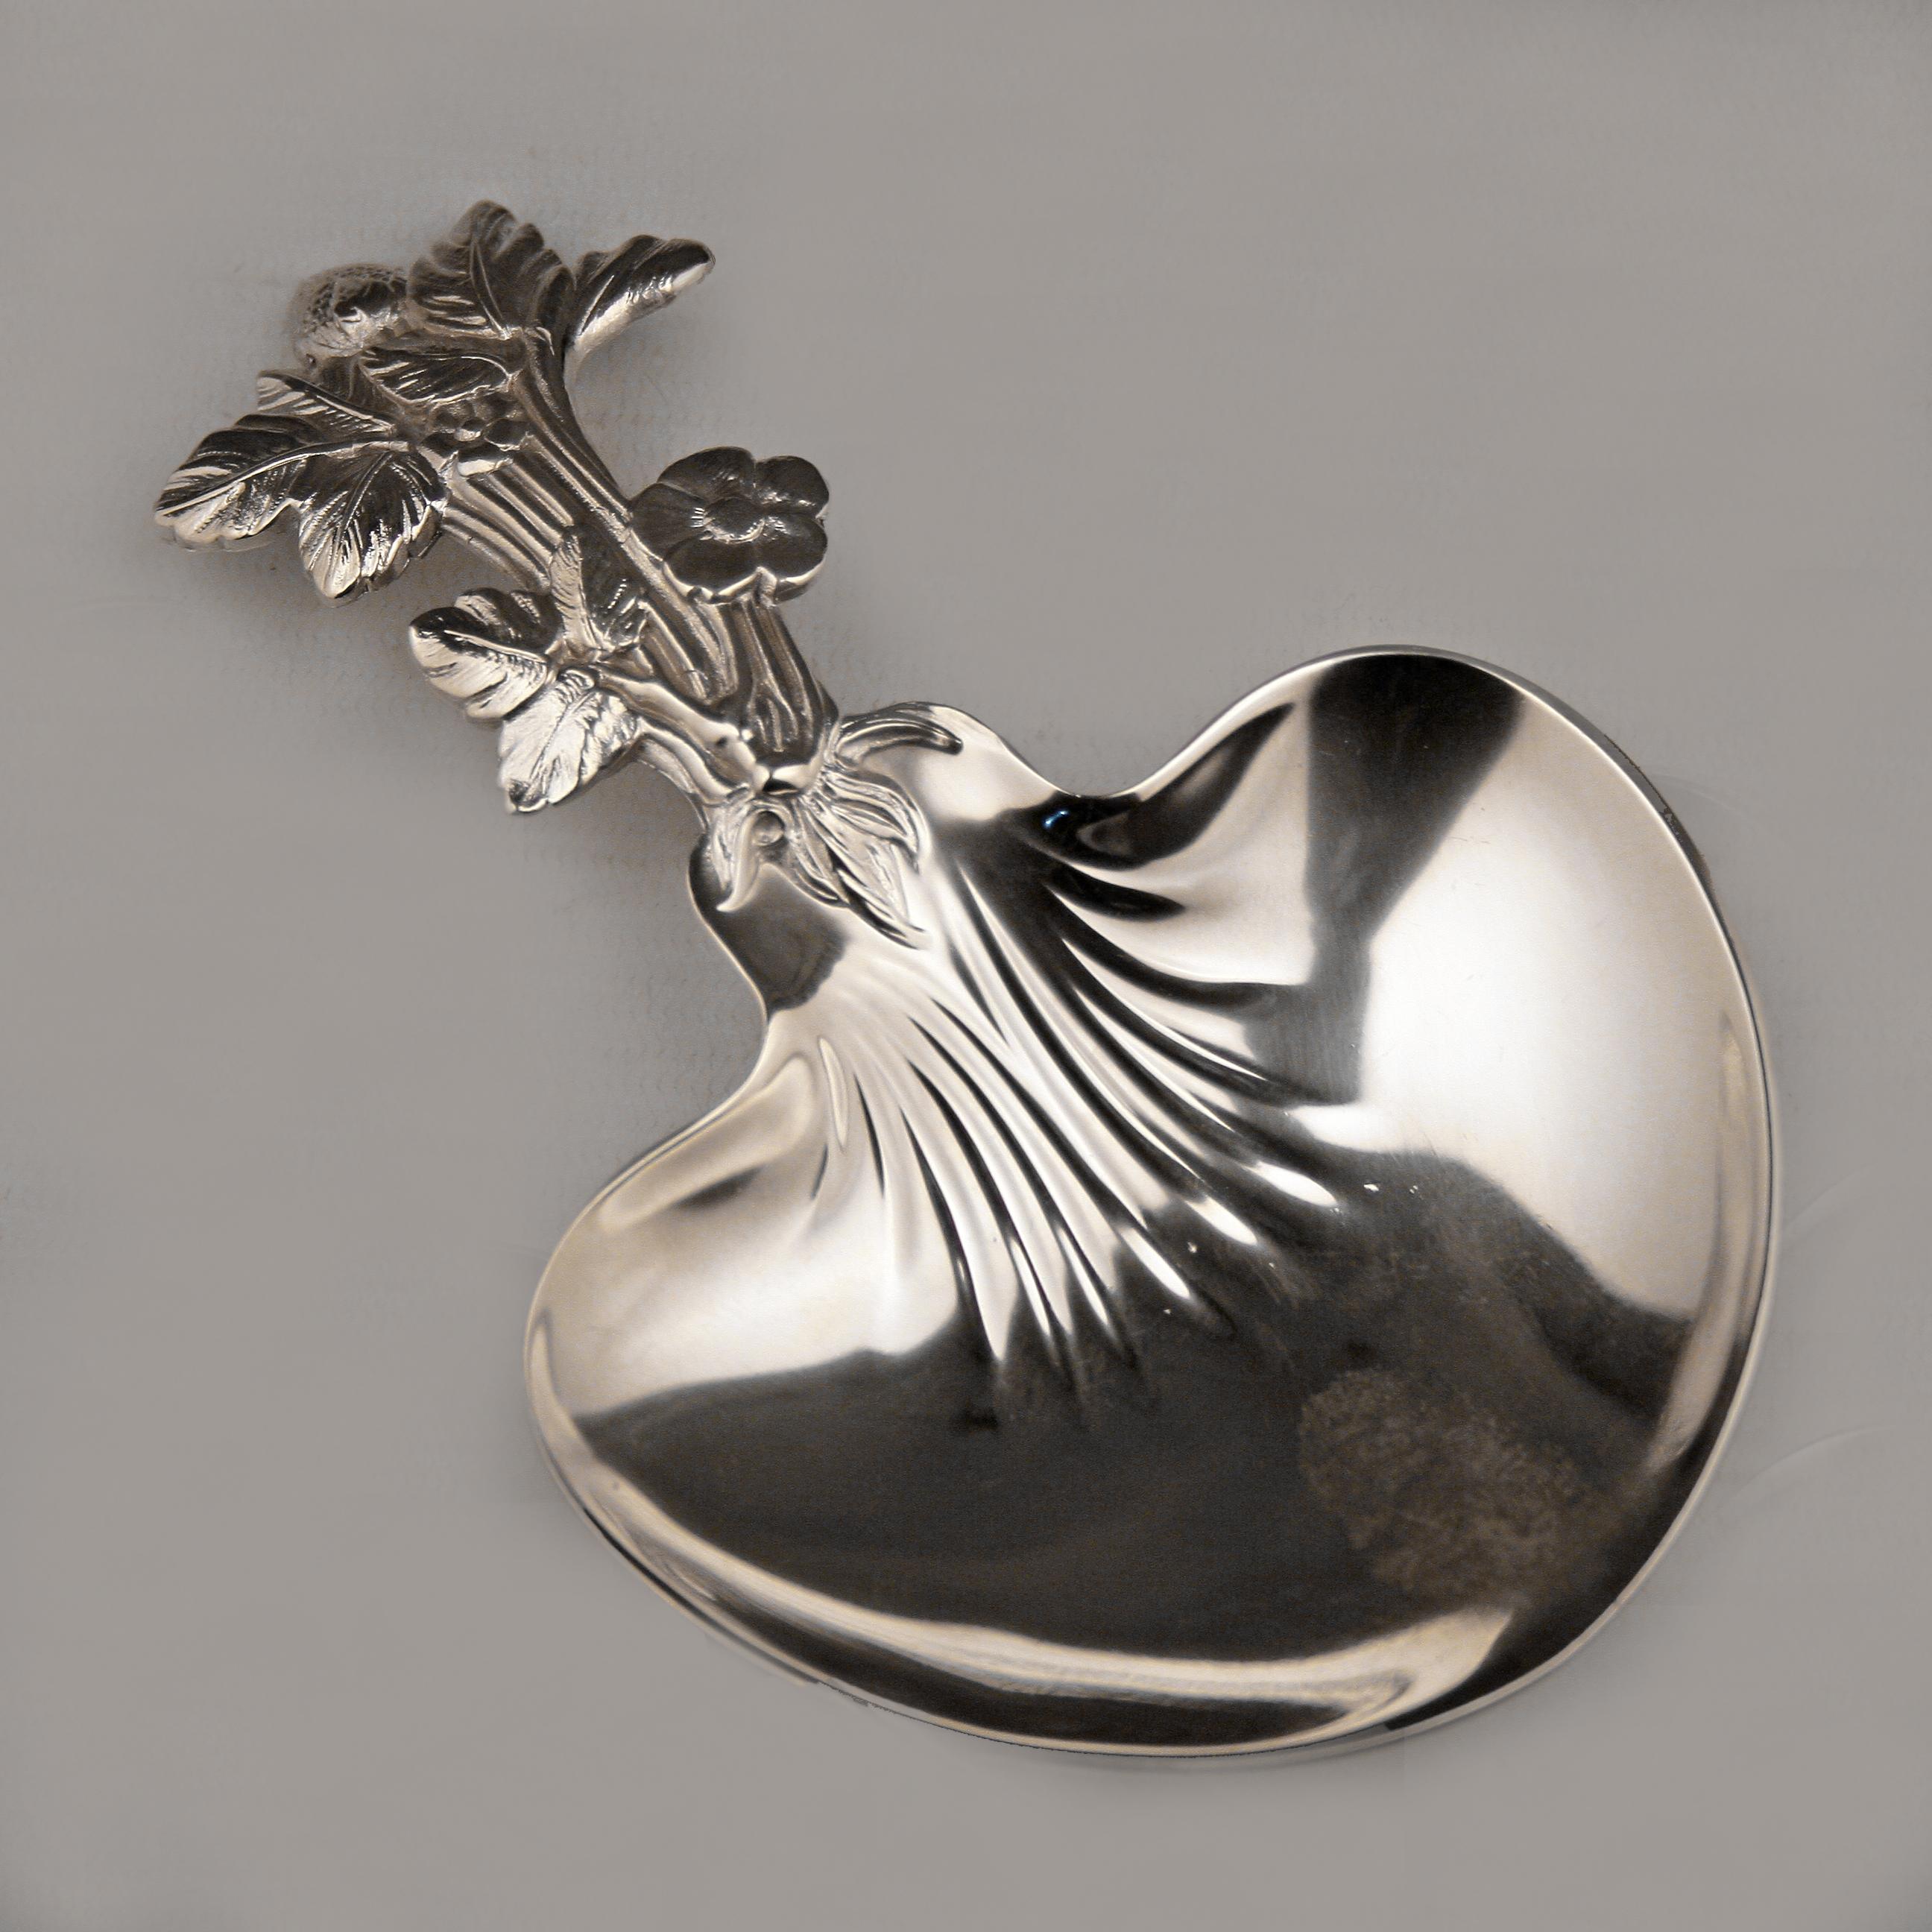 Art Nouveau french silverplate sommelier wine tester Christofle's 'Paiva Strawberry Spoon'

By: Chirstofle
Material: silver, copper, sheffield plate, sterling silver, silver plate, metal
Technique: plated, silvered, carved, polished,